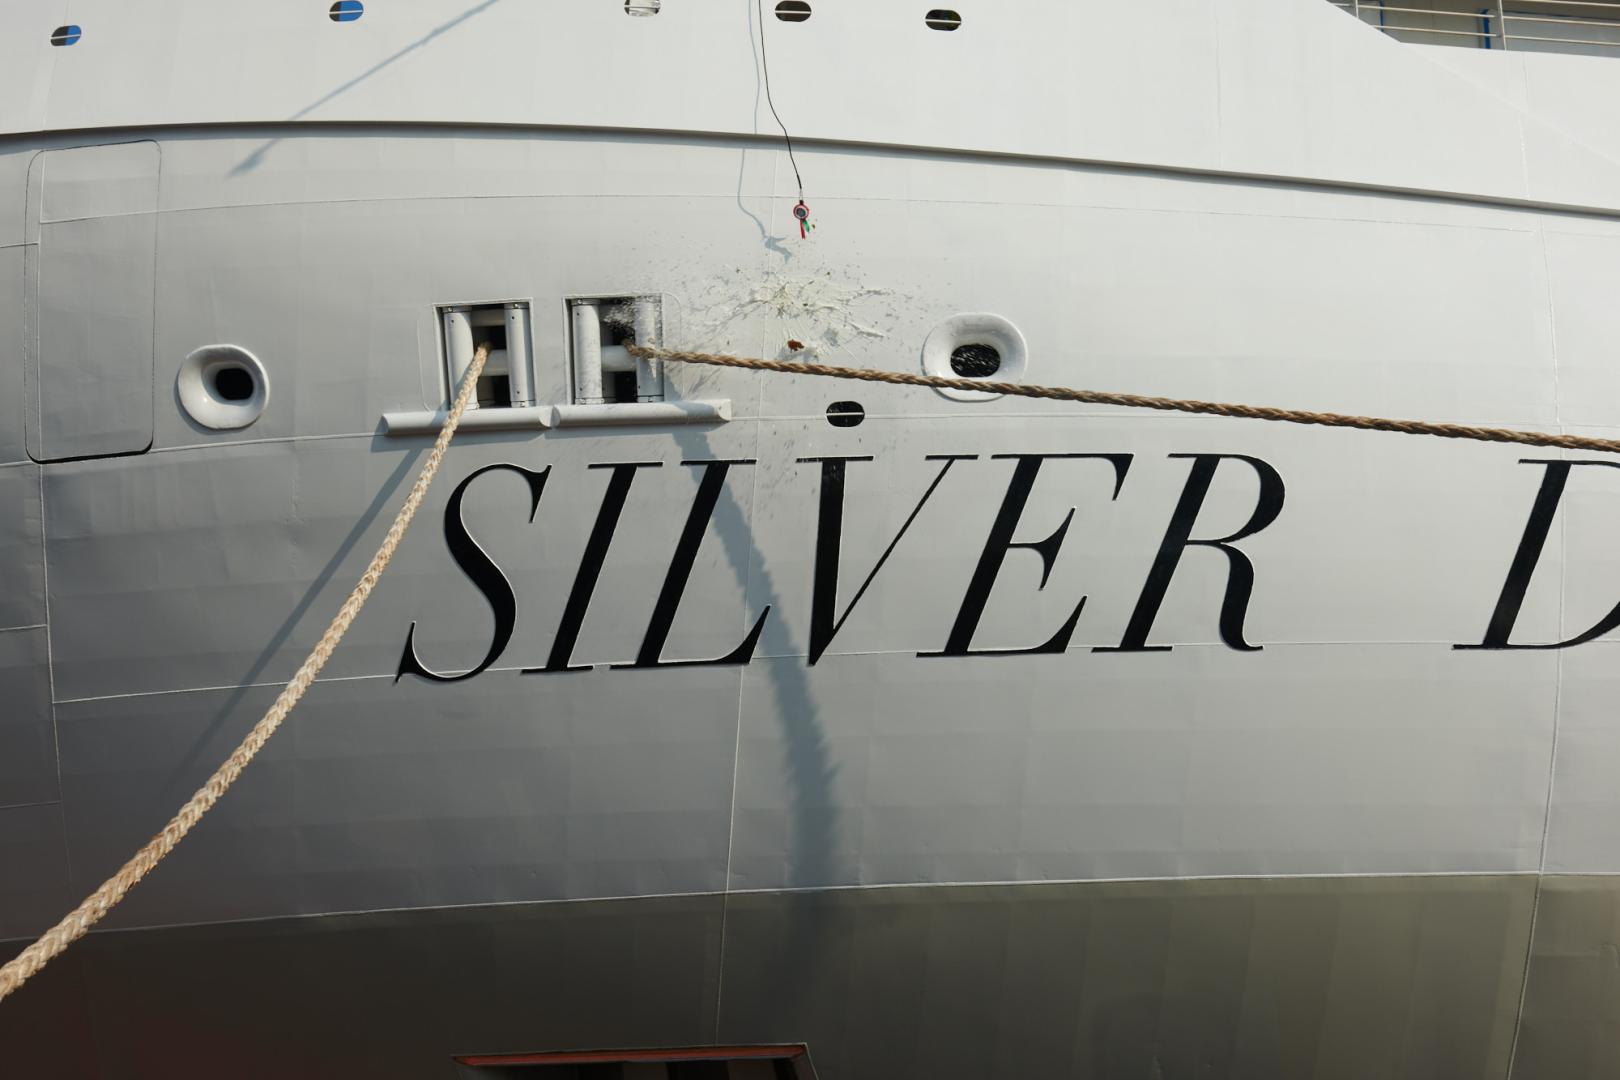 New ship Silver Dawn touched water for the first time today